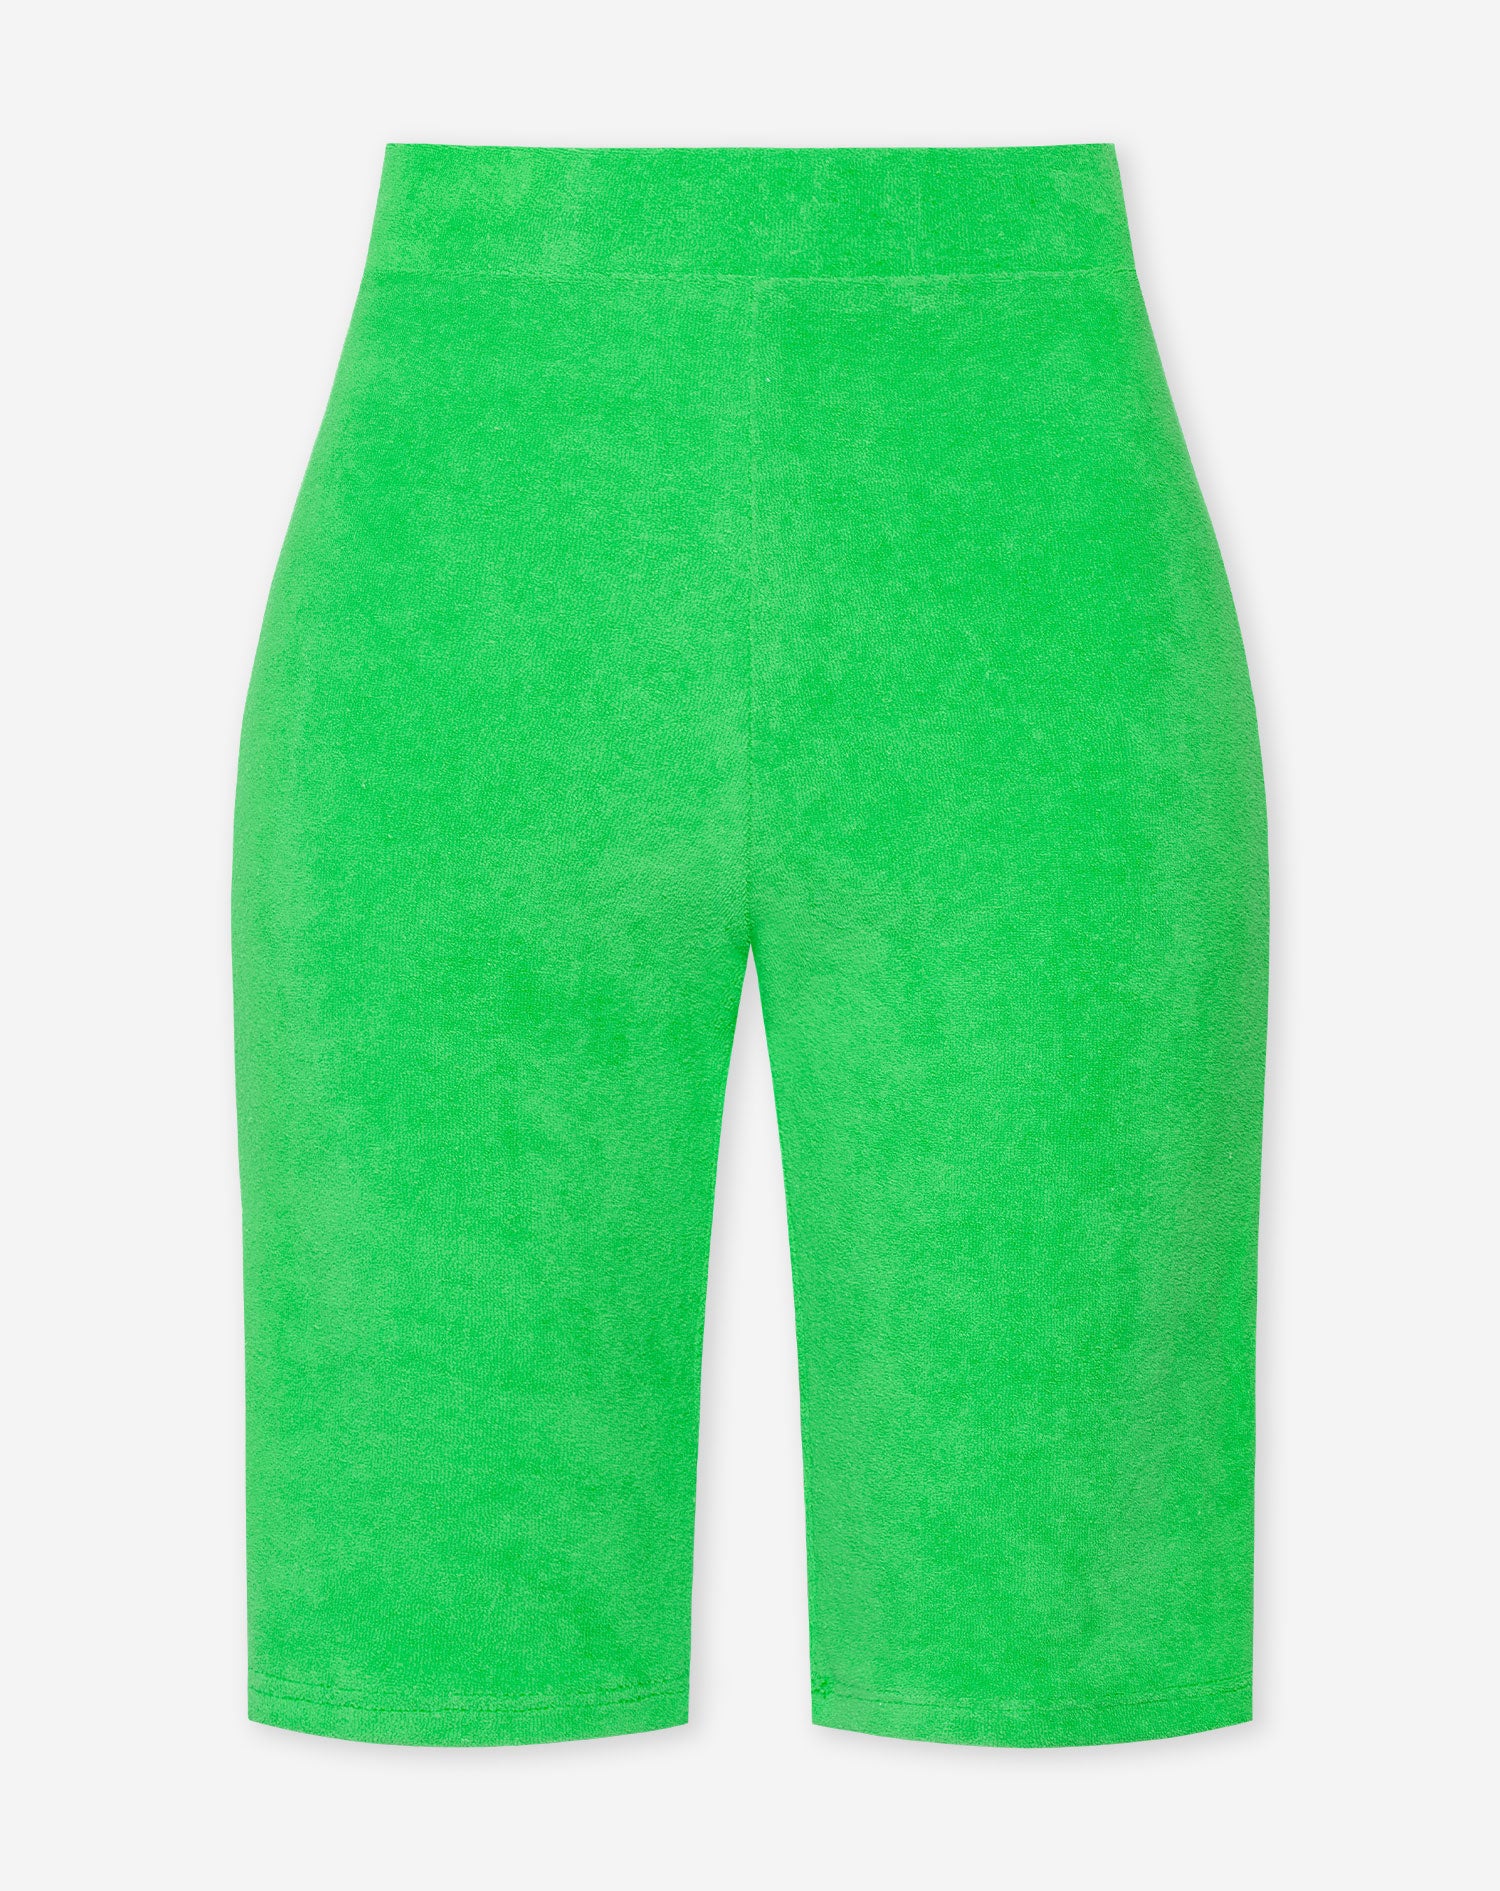 TERRY CLOTH CYCLE SHORT GREEN